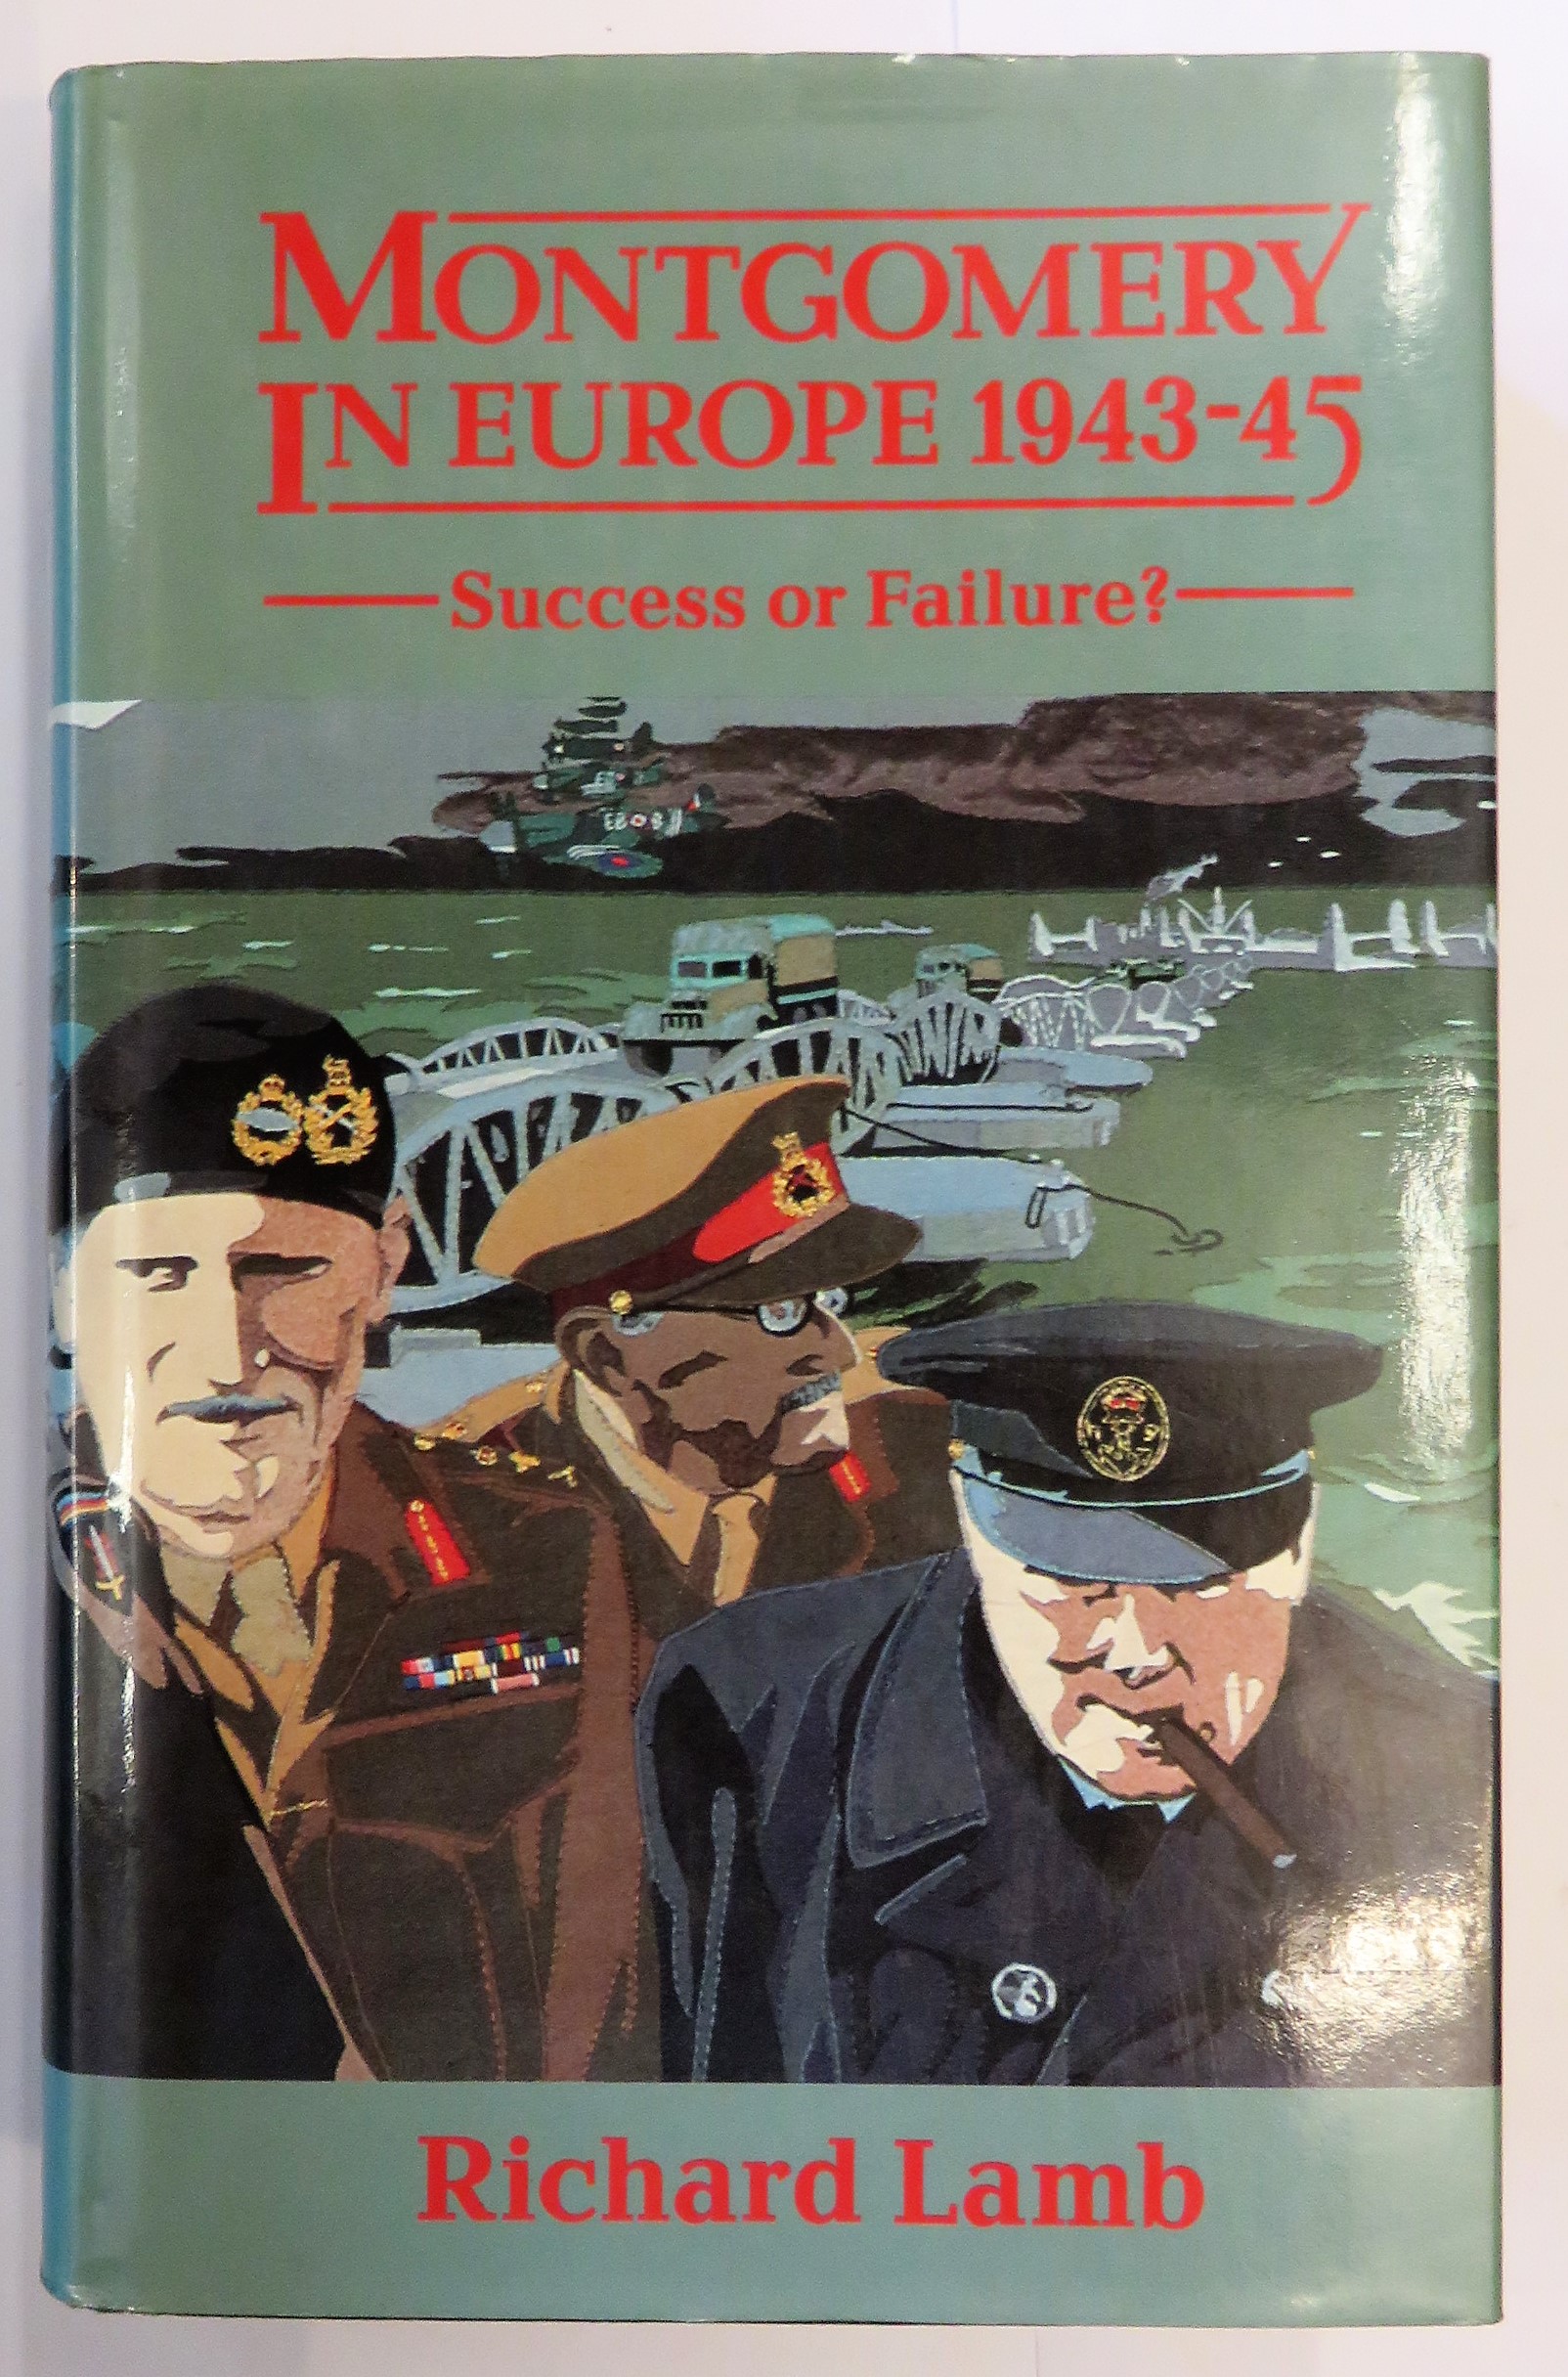 Montgomery in Europe 1943-45: Success or Failure?